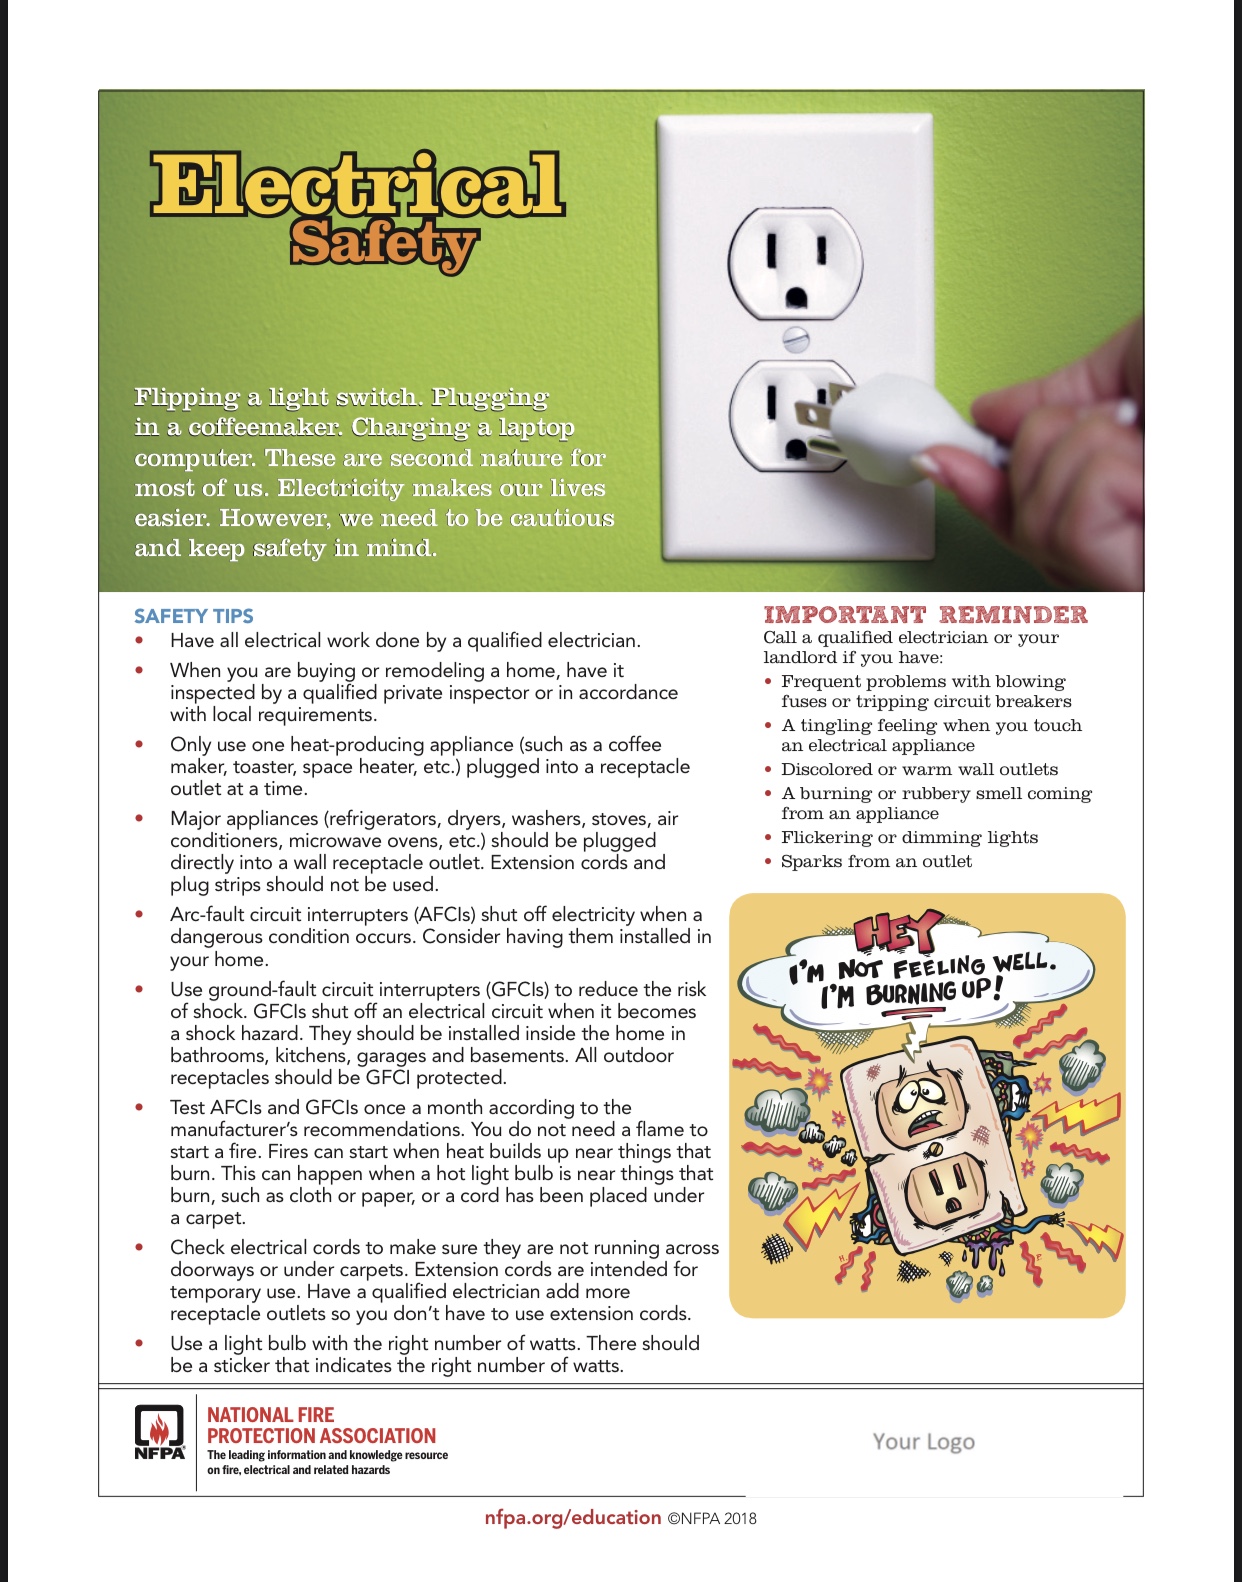 FACE-CHECKING ELECTRICAL SAFETY TIPS